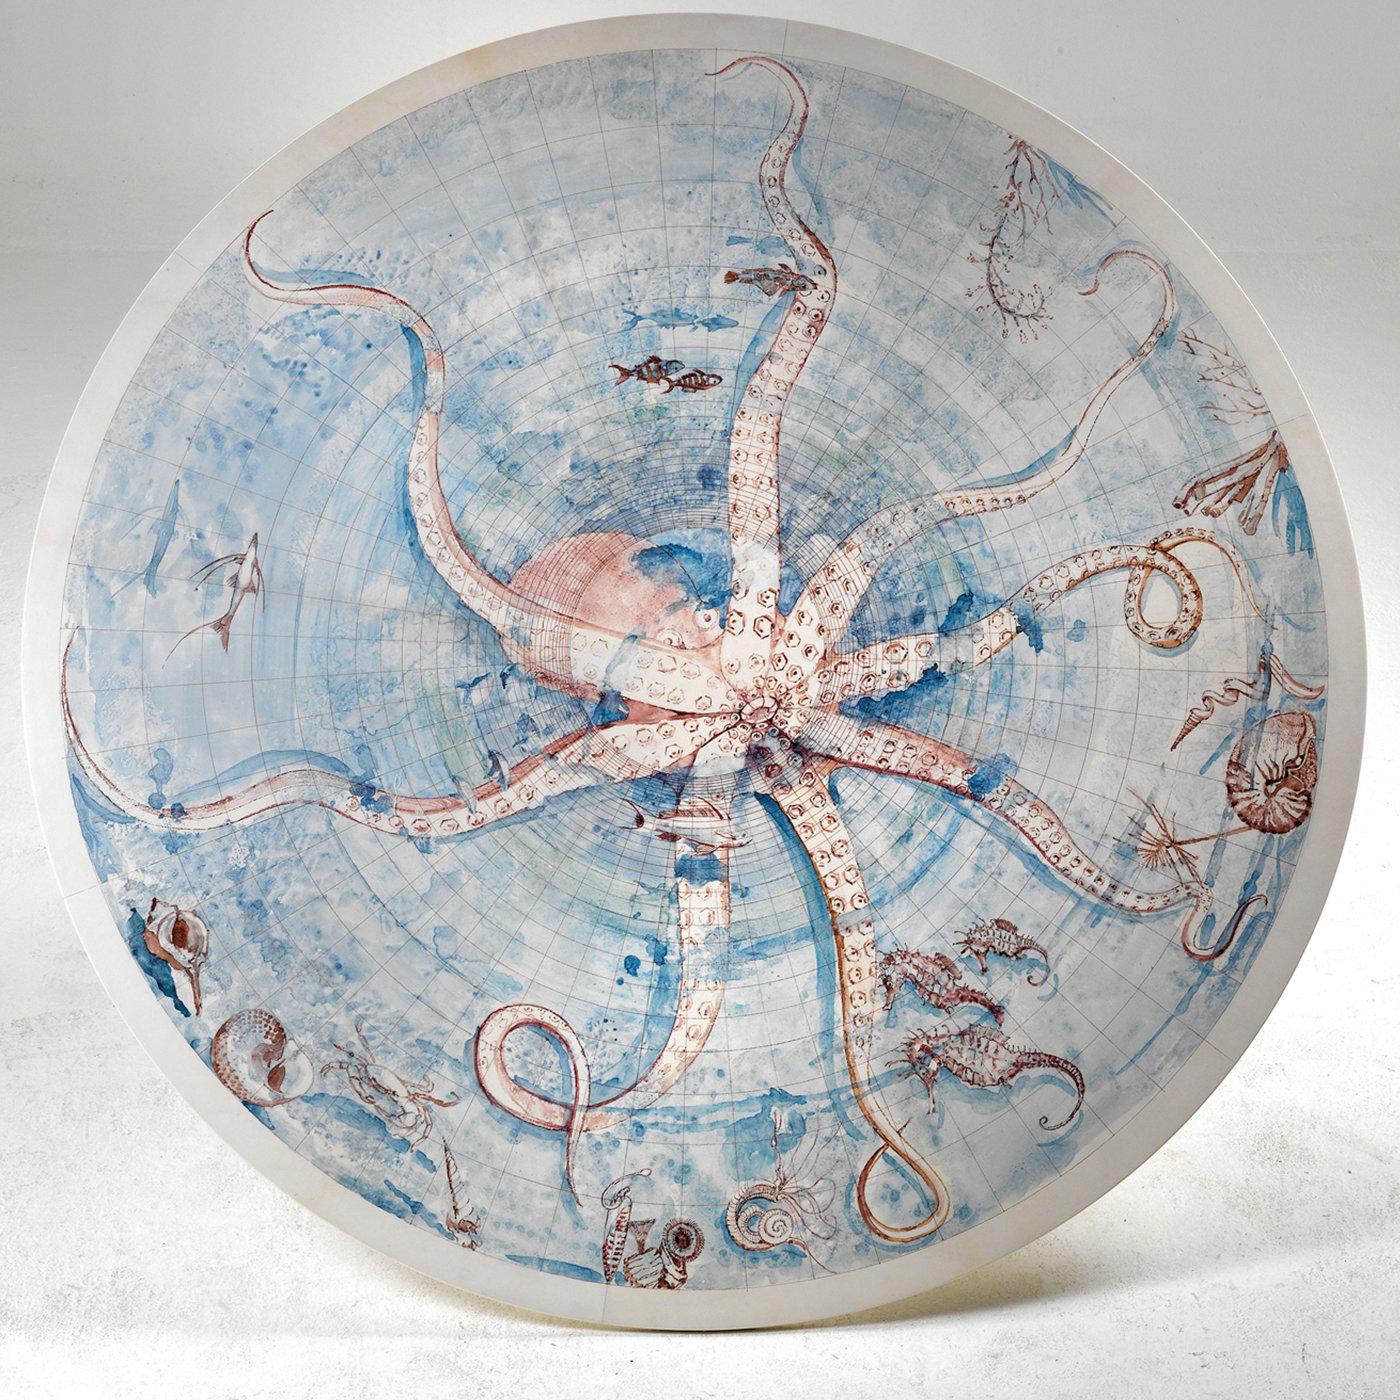 Named after the delicate sea motif painted by Roman artist Giancarlo Micheli on the round parchment top, the Octopus Table is a one-of-a-kind piece that fully expresses Tura's quality of craftsmanship and creativity. The white parchment of the